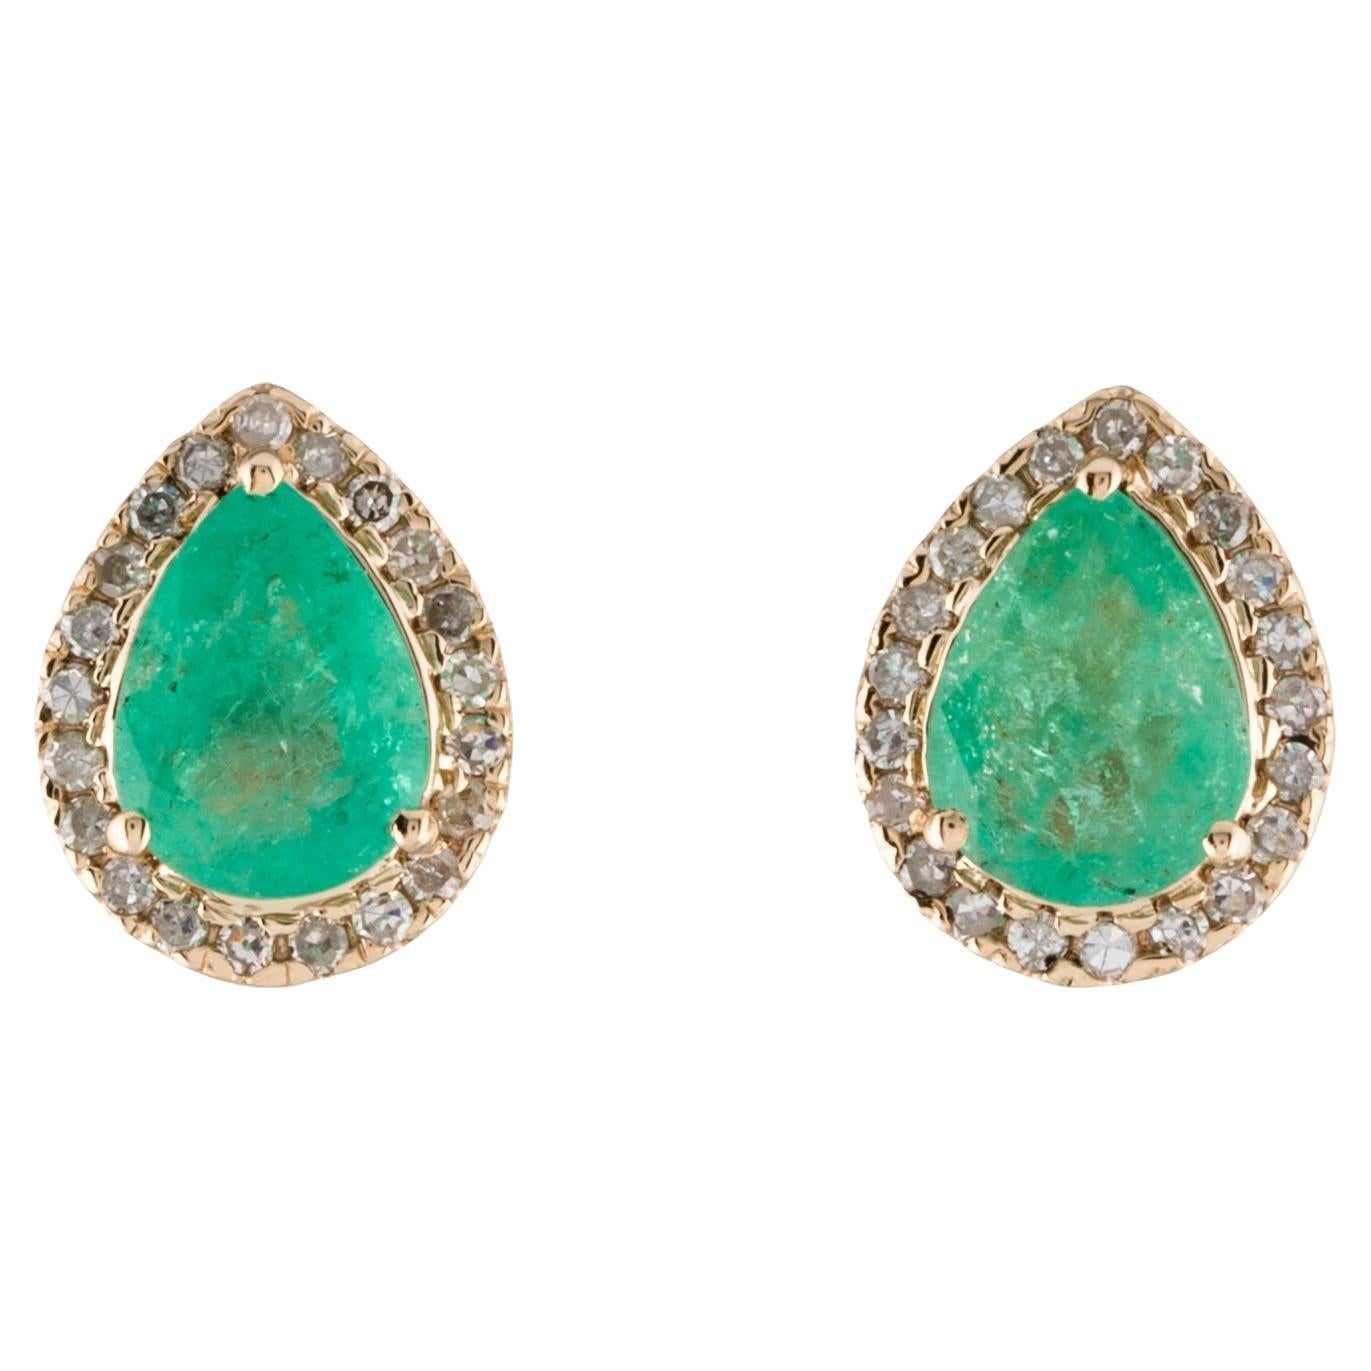 14K Yellow Gold Stud Earrings with 2.06ct Pear-Shaped Emeralds and Diamond For Sale